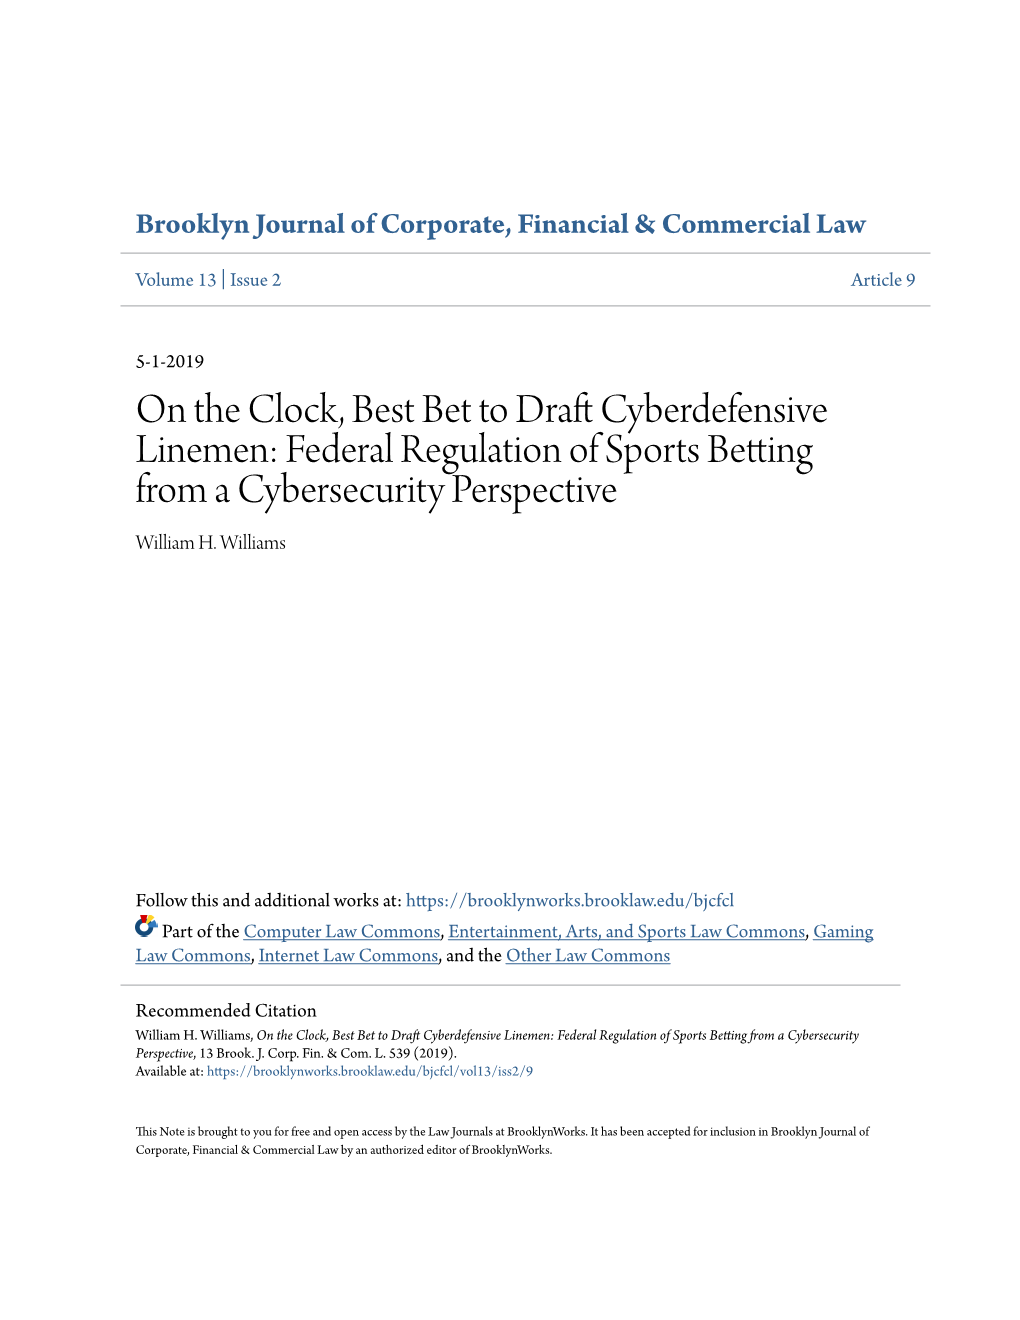 Federal Regulation of Sports Betting from a Cybersecurity Perspective William H